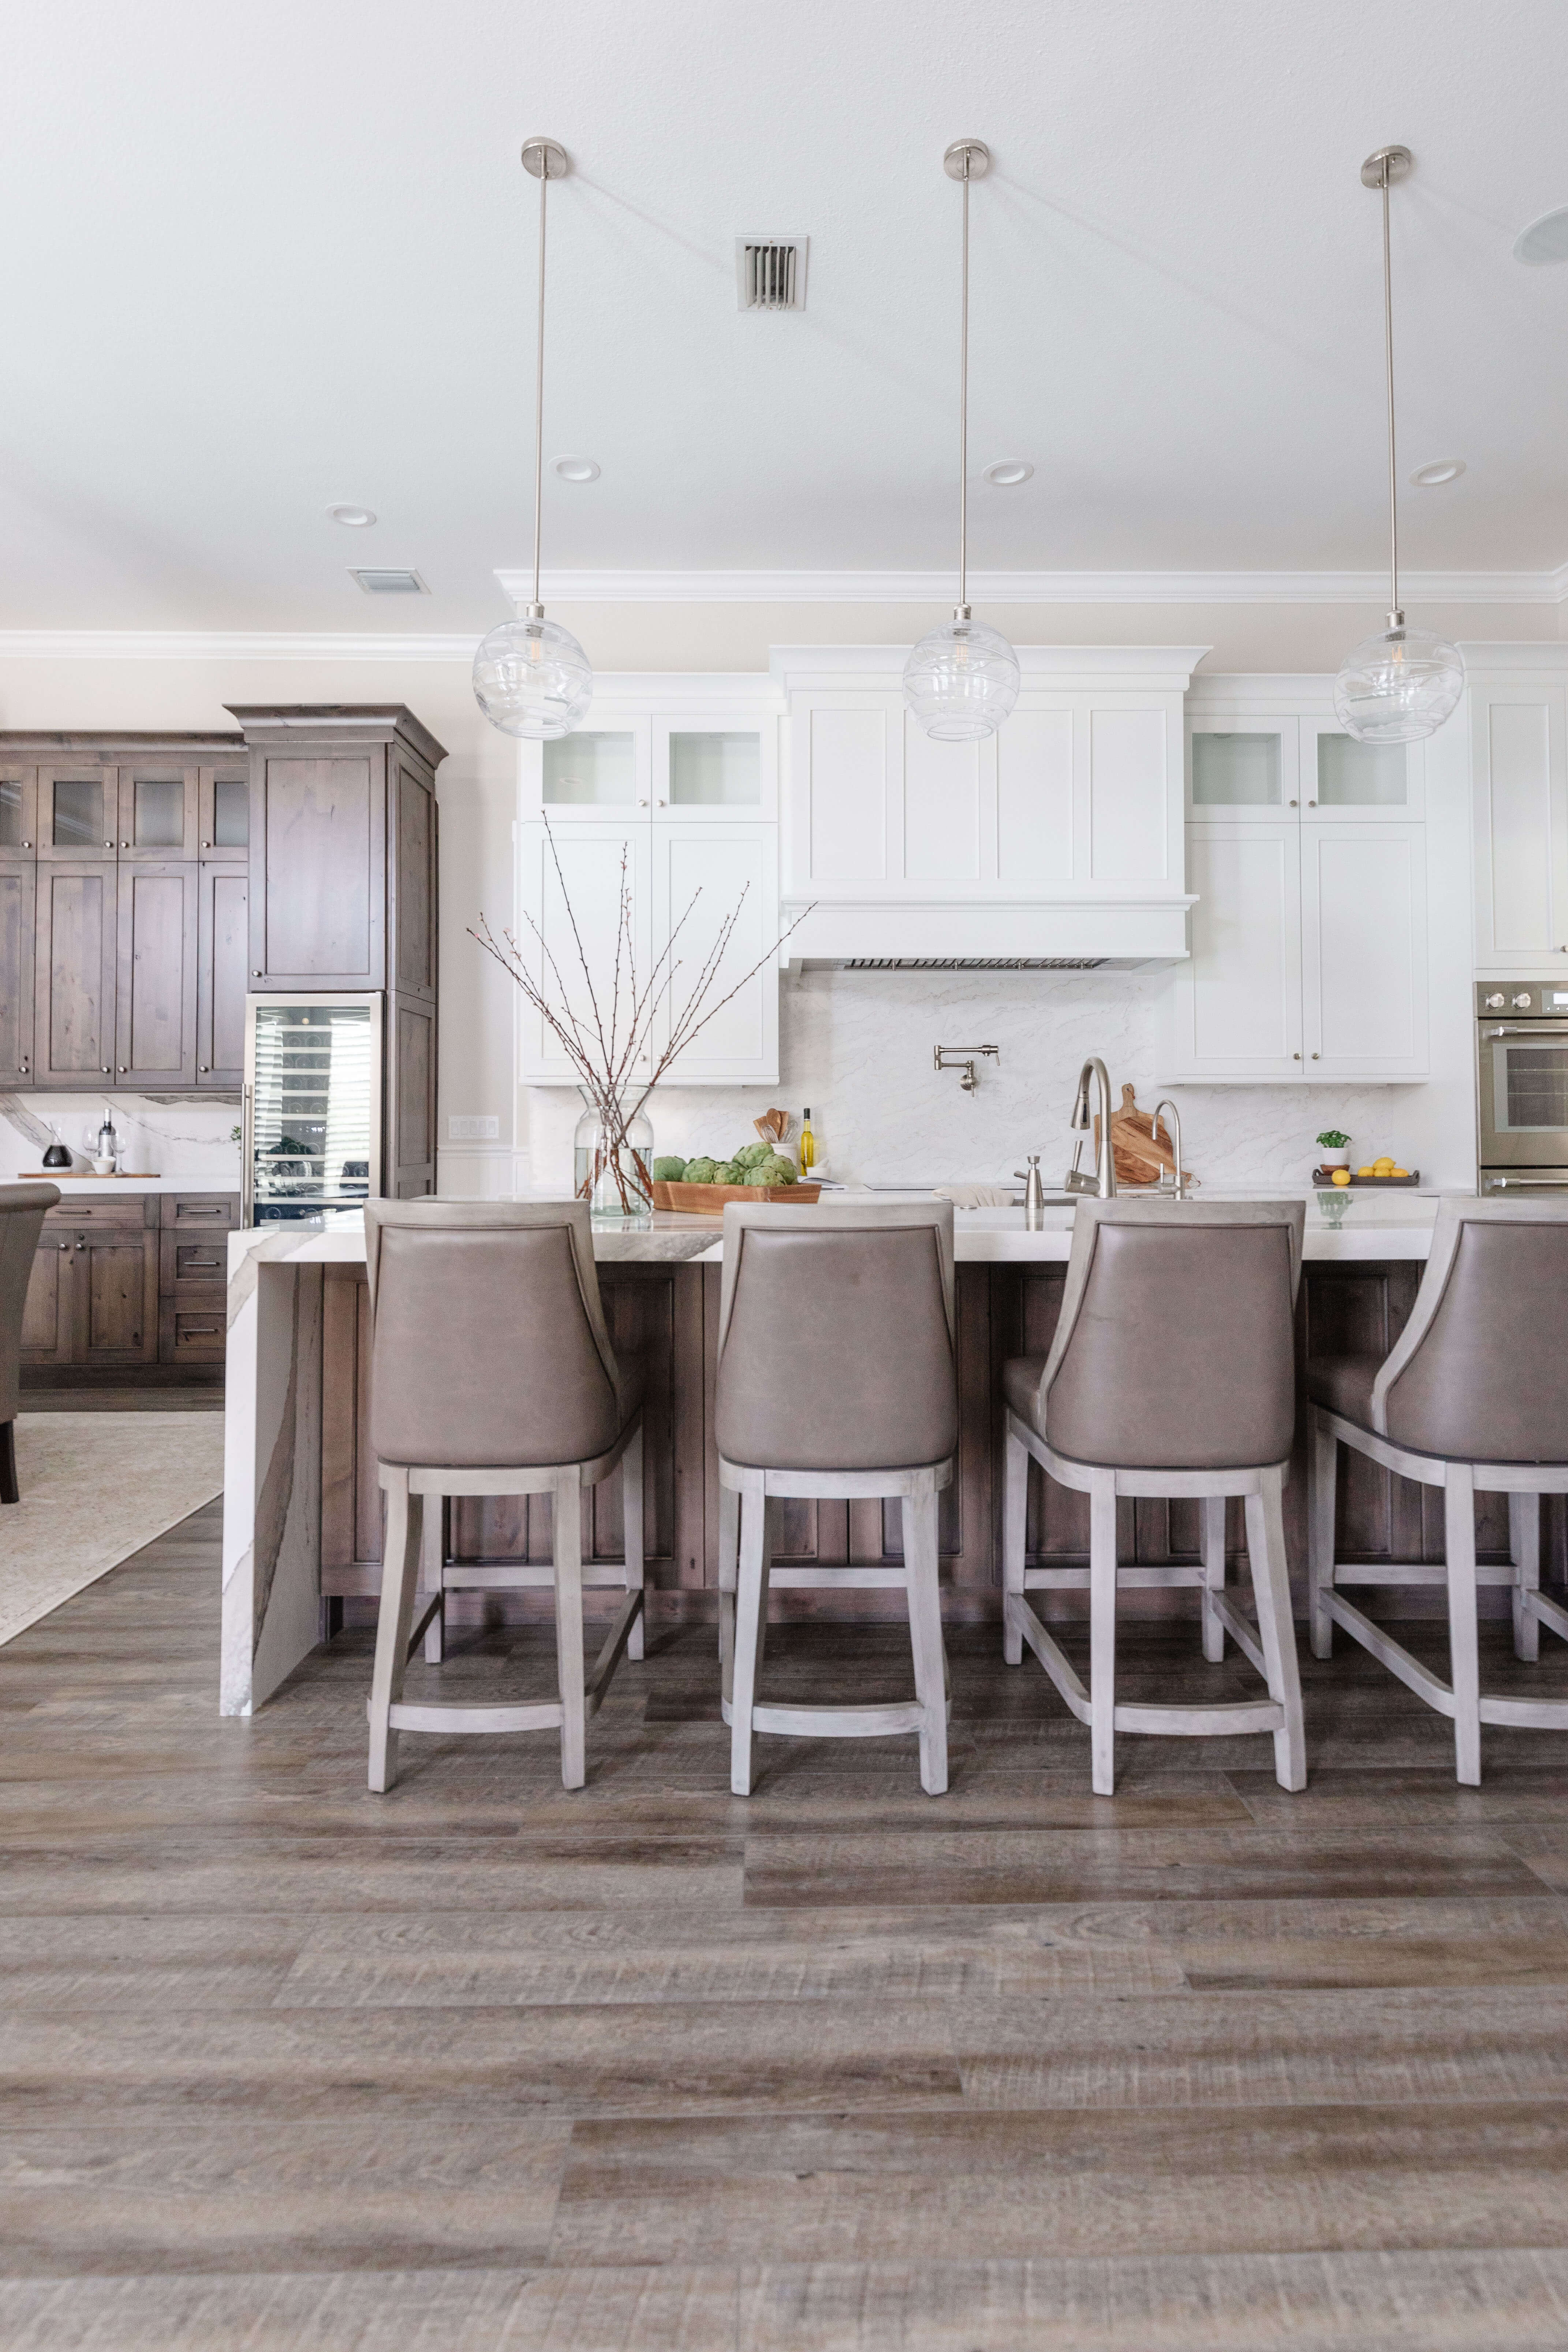 This remodel story features a stunning transformation. The new kitchen design is expanded and has lots more storage. The two-tone finshes use a bright white paint for the perimeter and the wood hood and dark stained knotty alder cabinets on the kitchen island and dining room area.